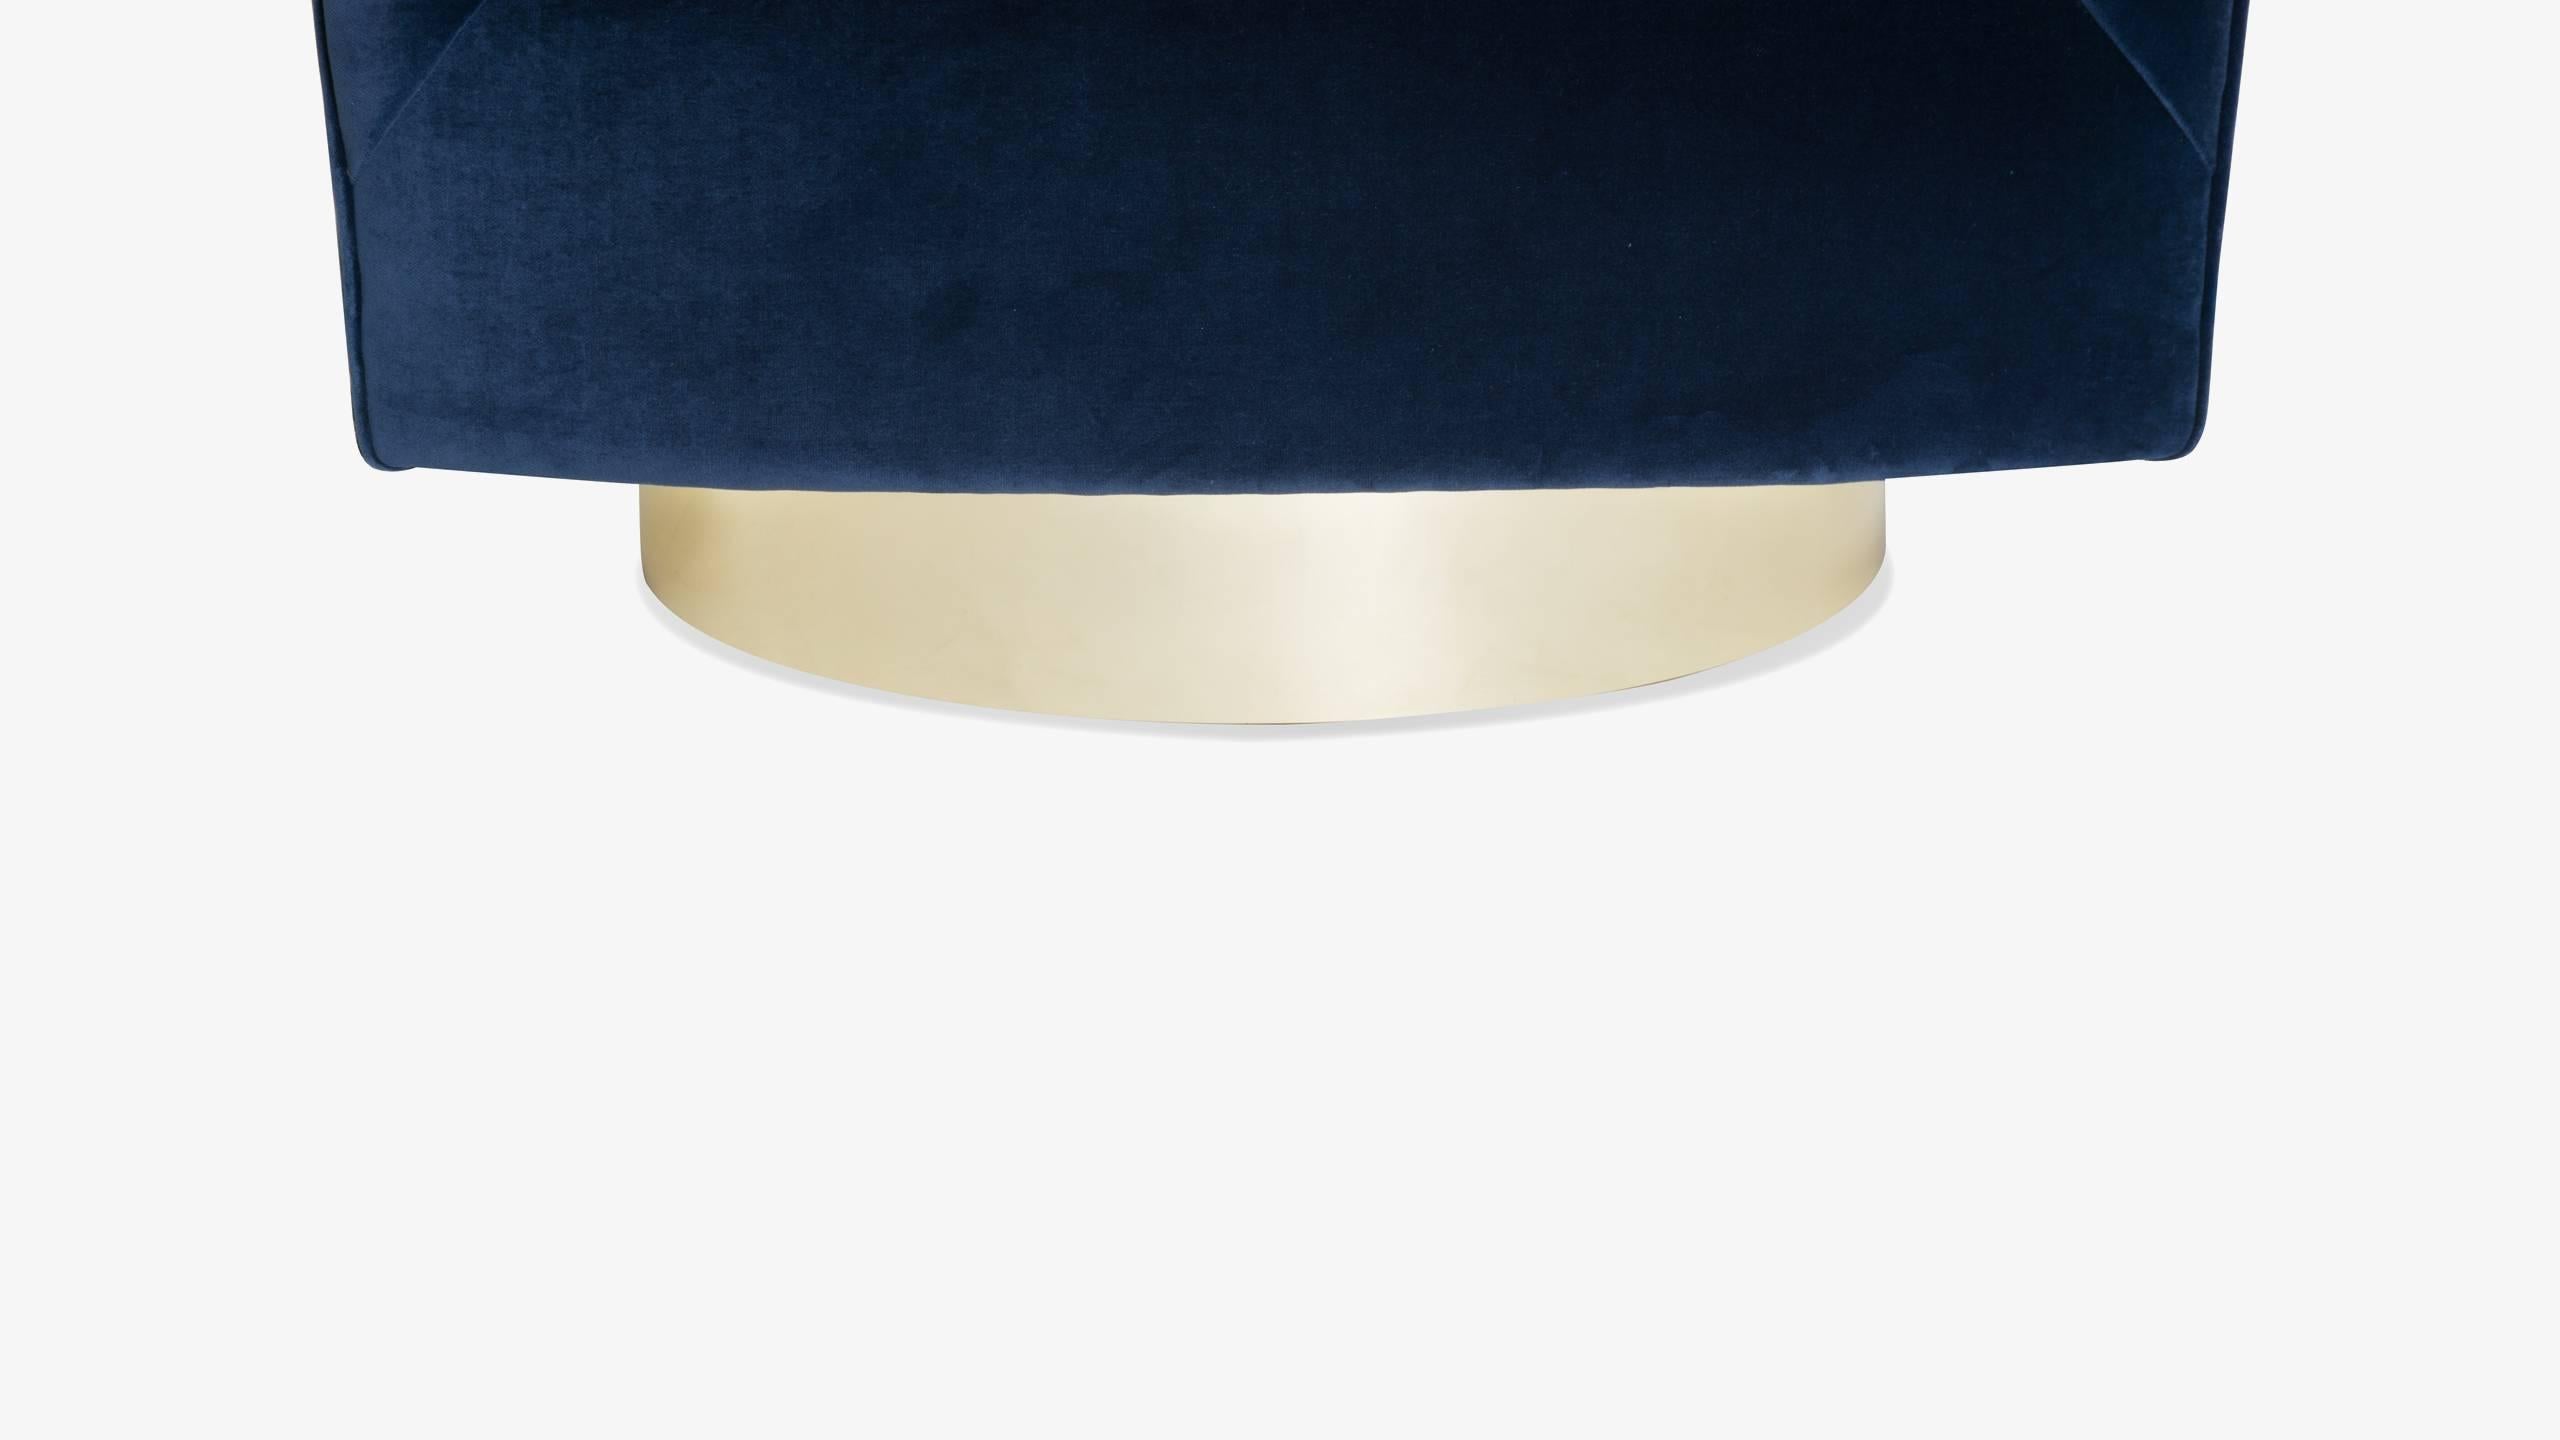 Upholstery Swivel Tub Chairs in Navy Velvet with Polished Brass Bases, Pair